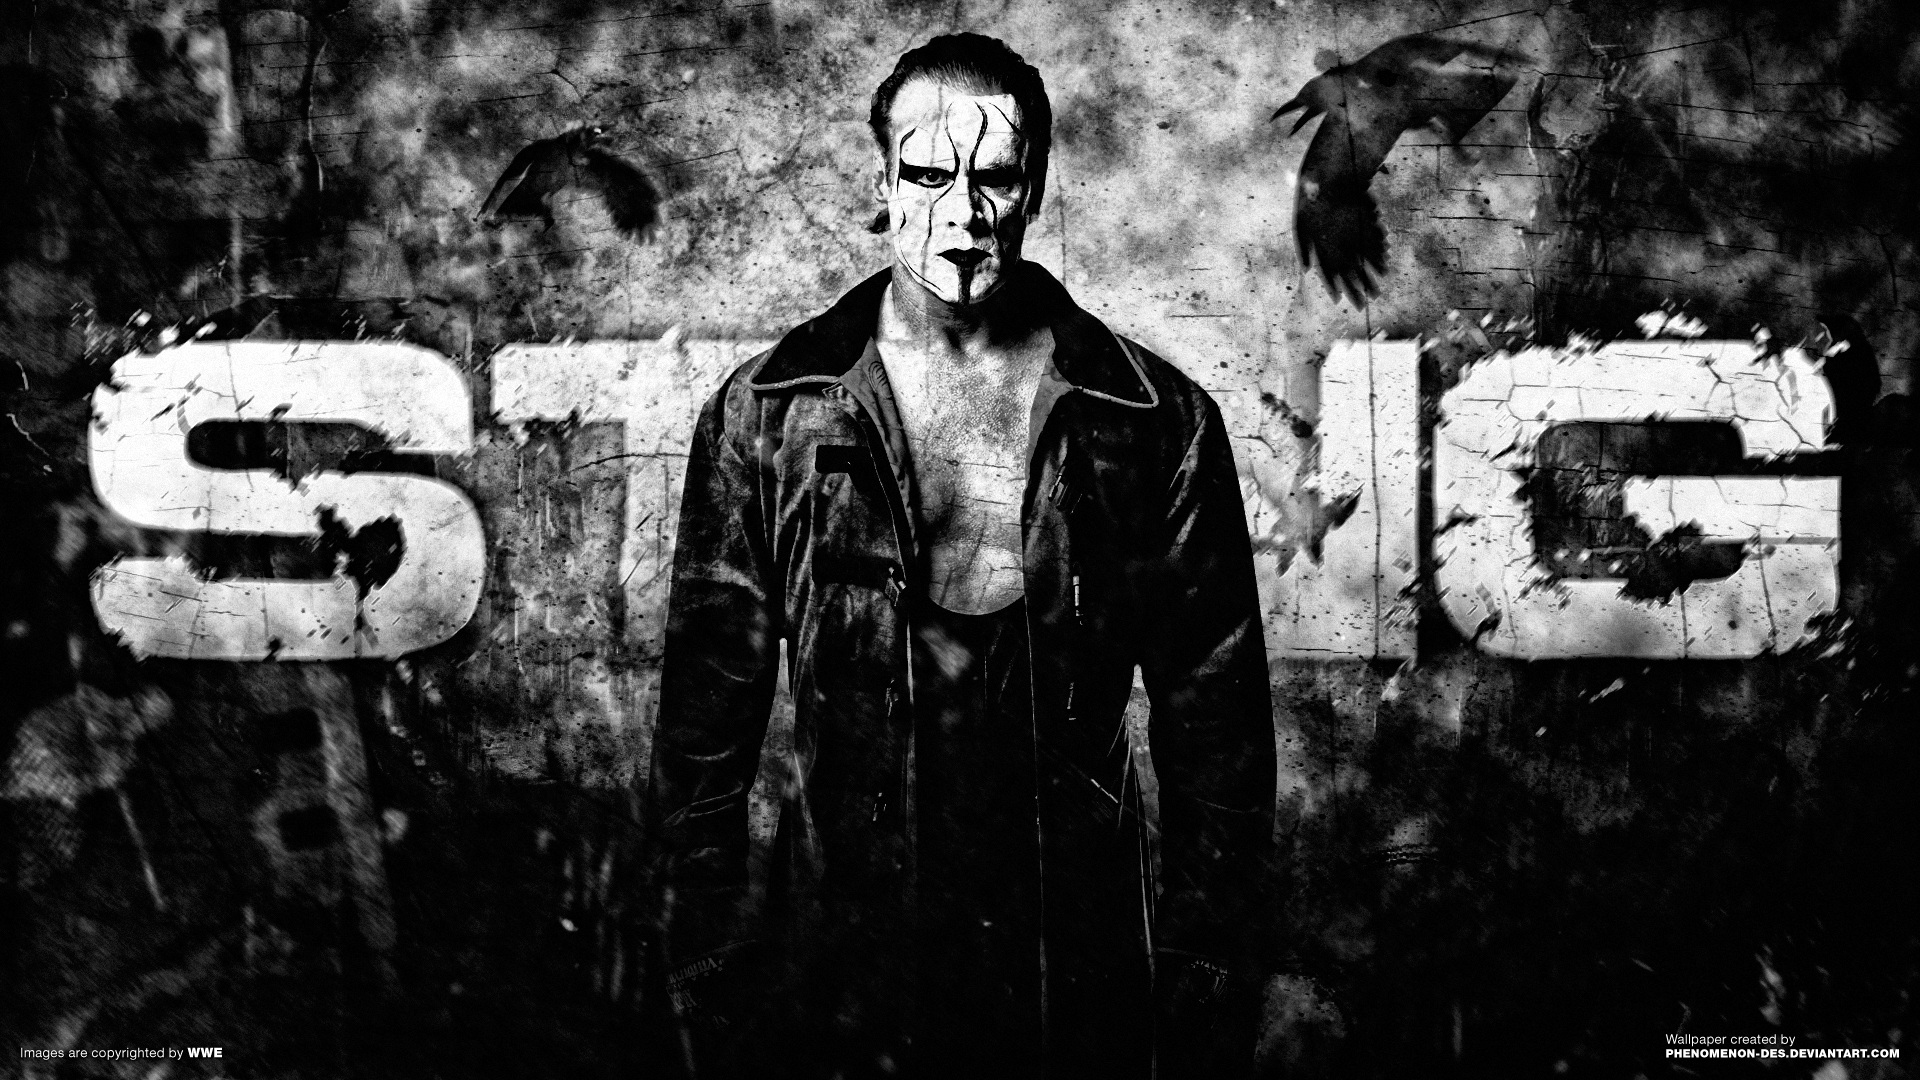 Sting Wallpapers